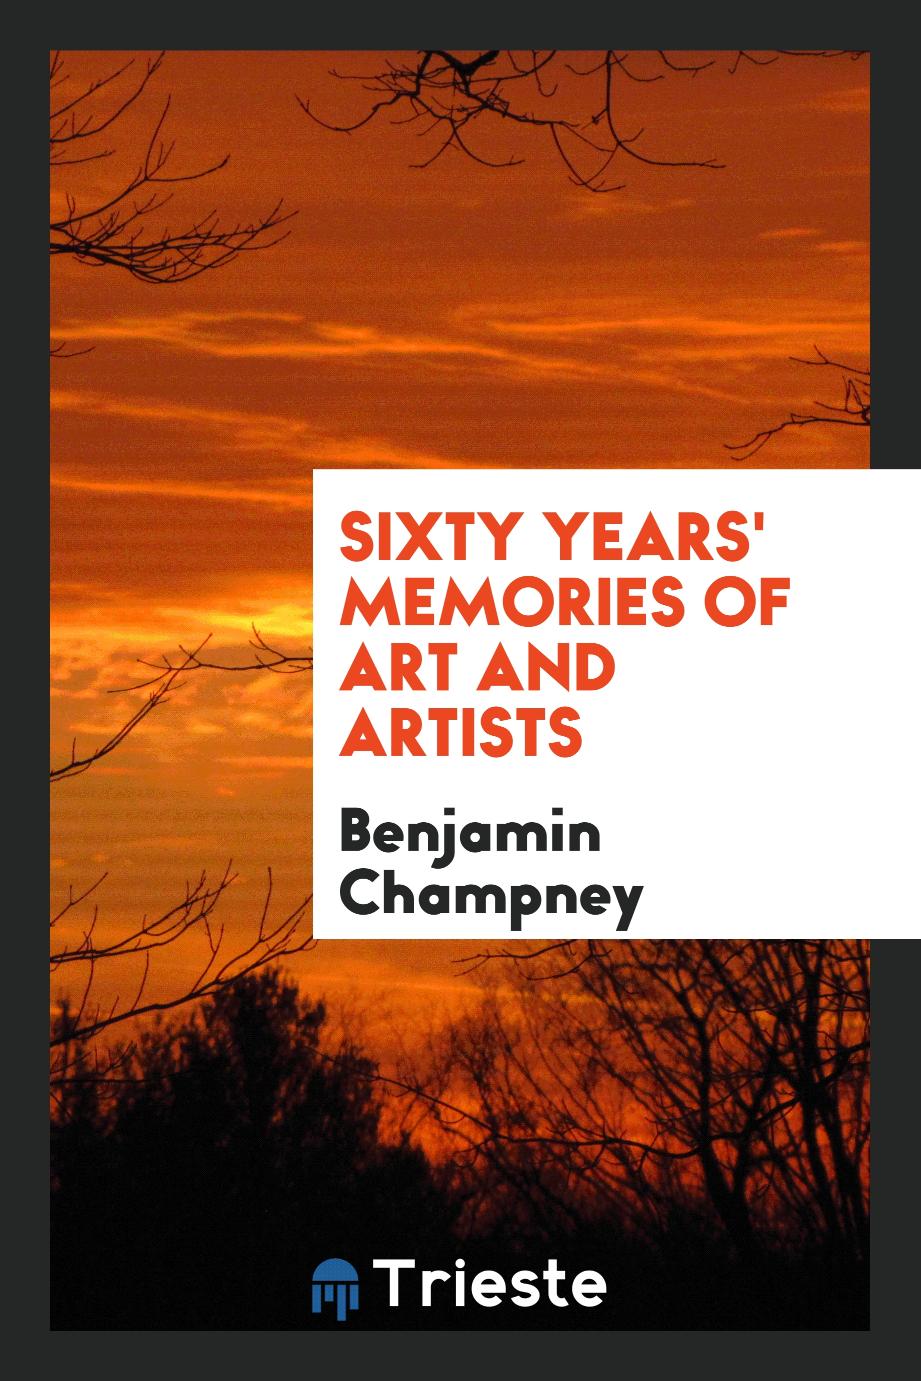 Sixty years' memories of art and artists